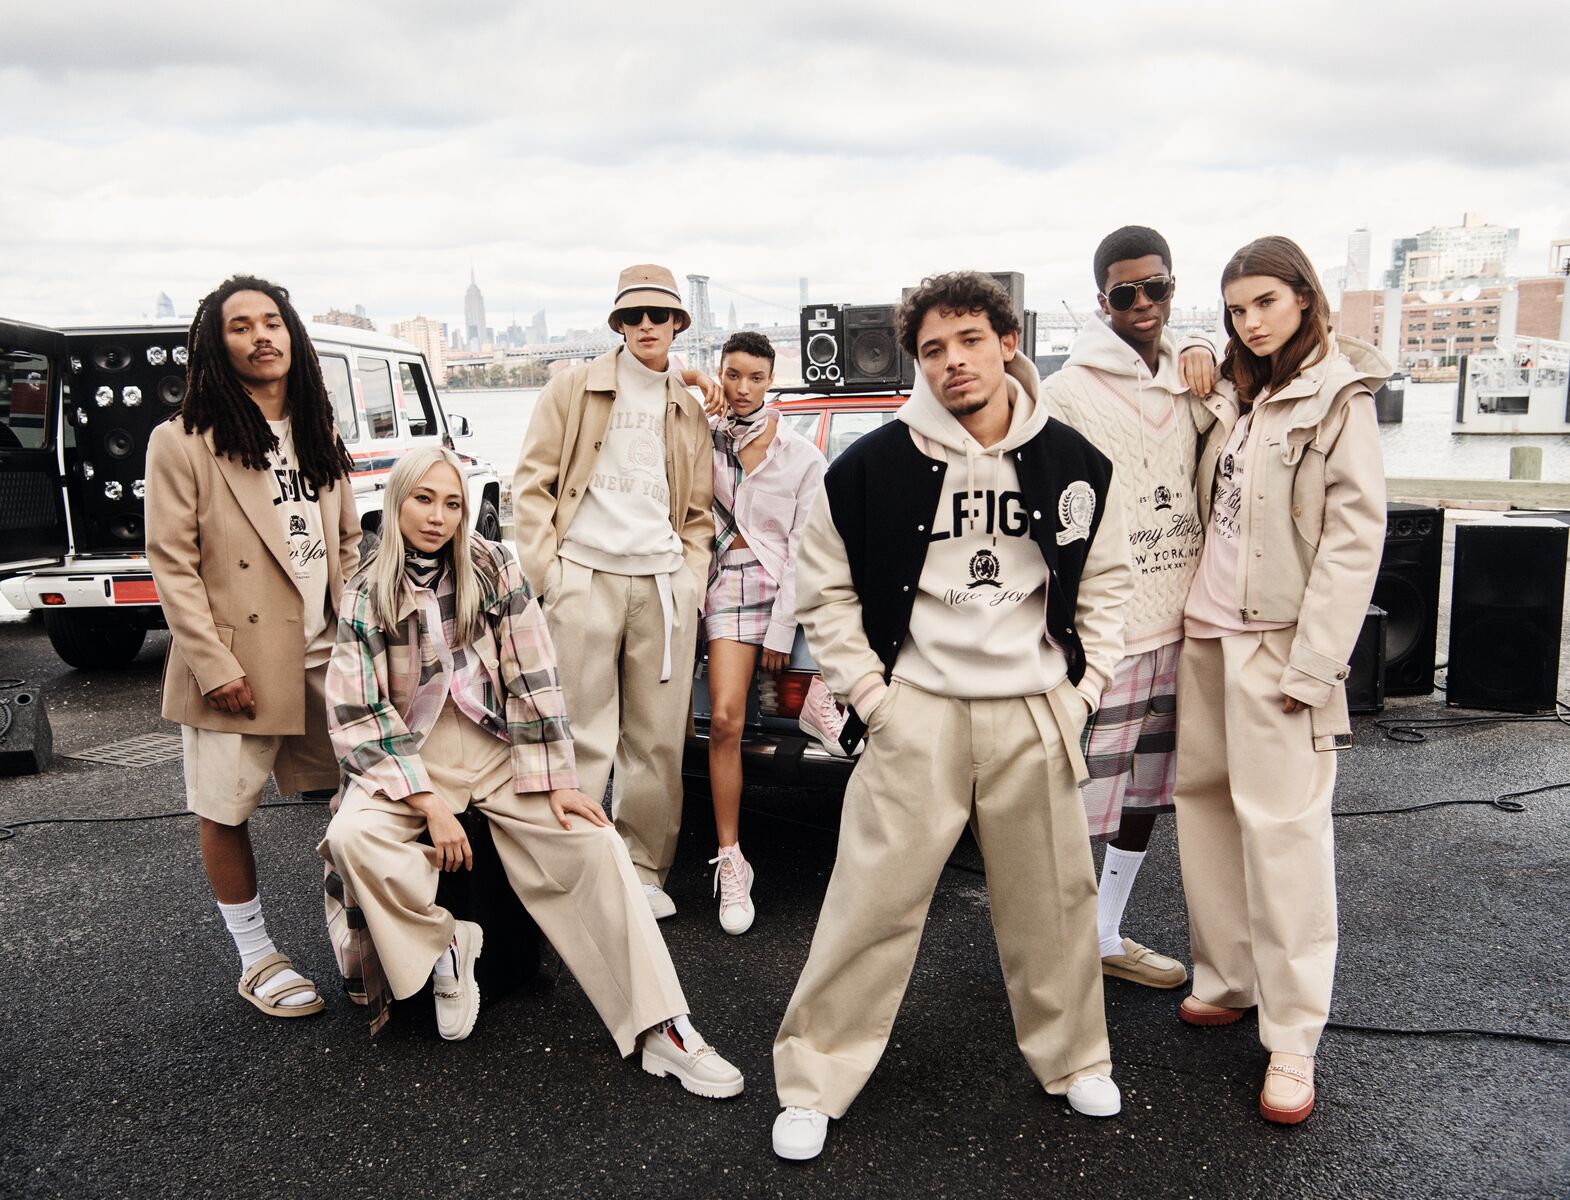 TOMMY HILFIGER CELEBRATES ICONIC STYLE WITH SPRING 2022 “MAKE YOUR MOVE